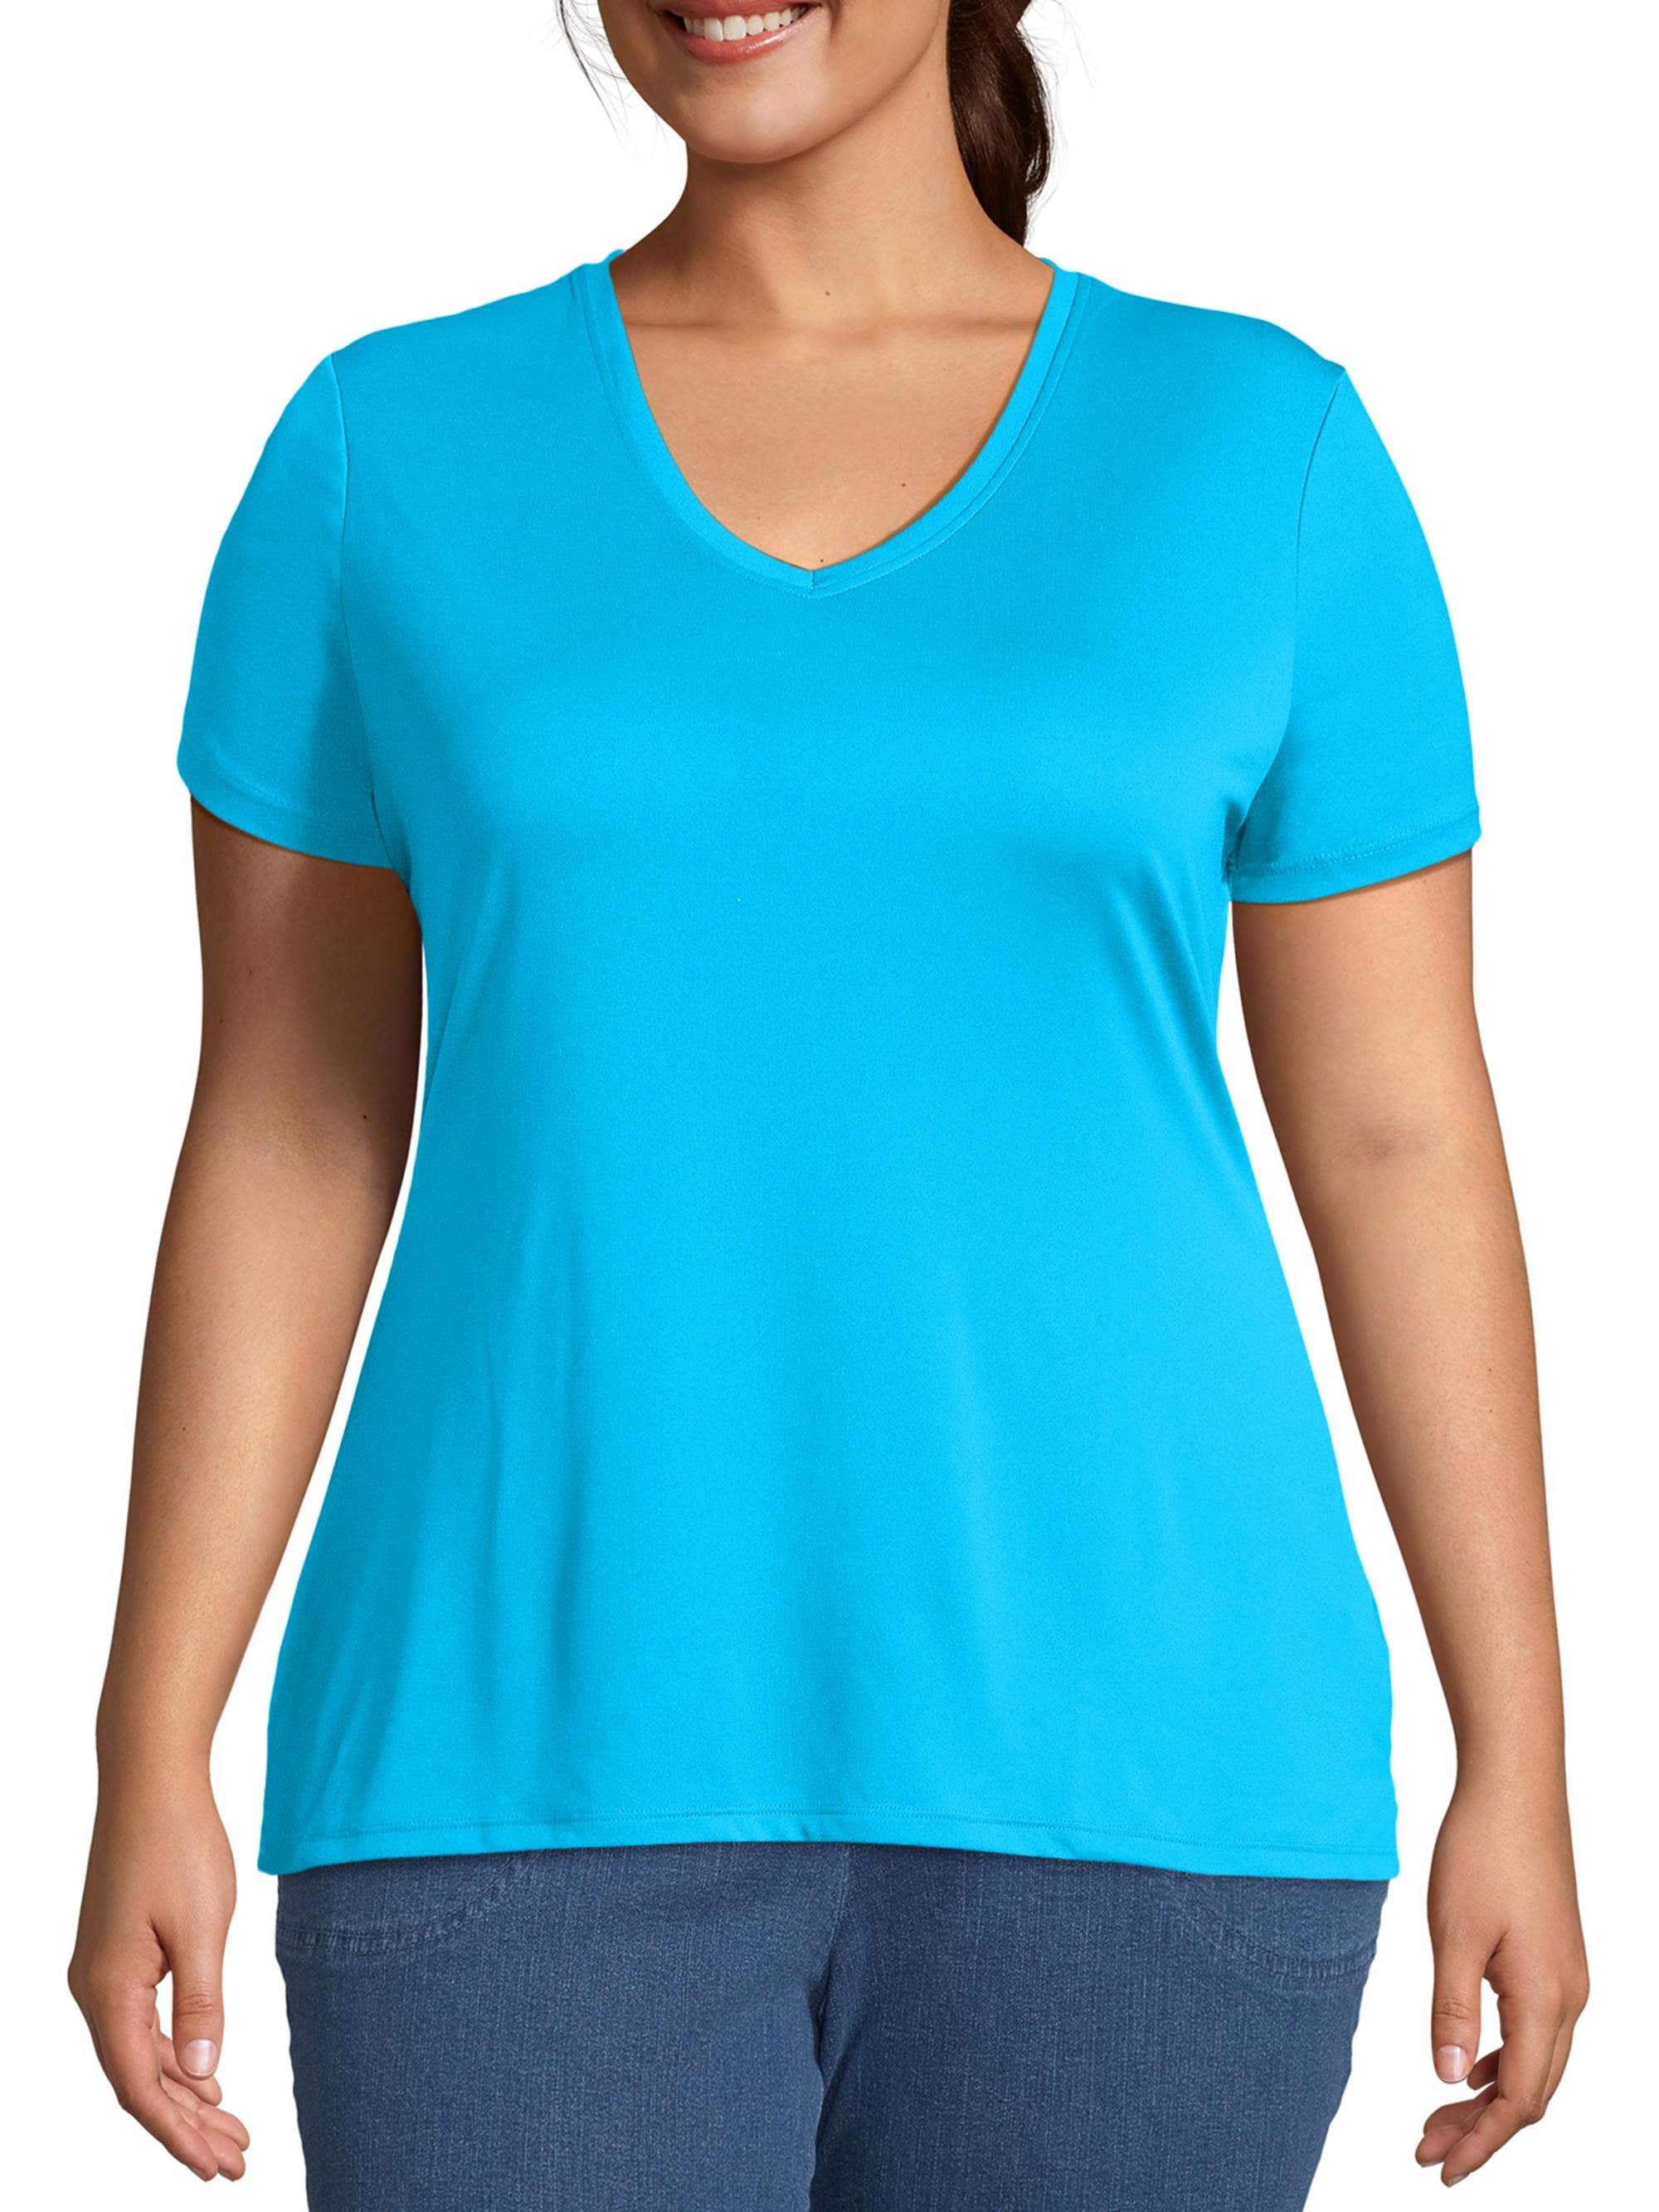 Plus Size - Super Soft Performance Jersey Full Length Active